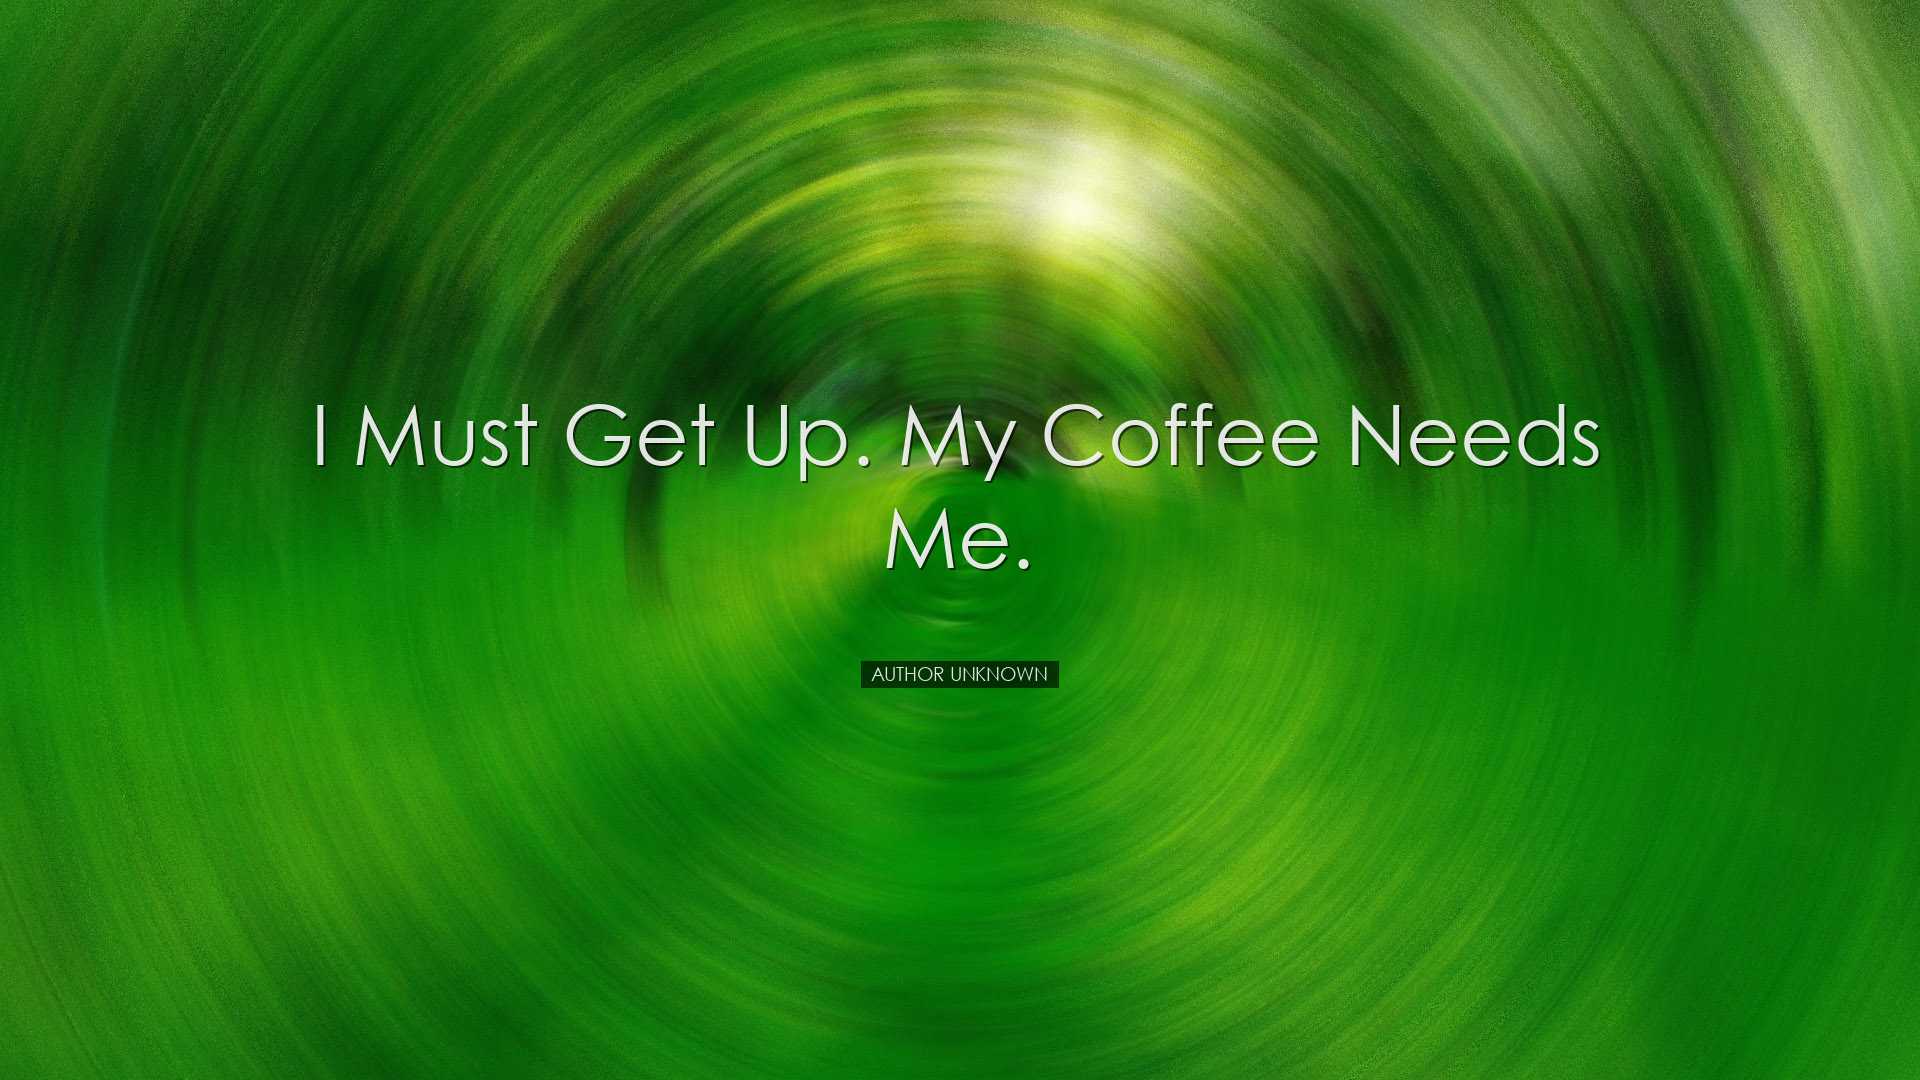 I must get up. My coffee needs me. - Author Unknown